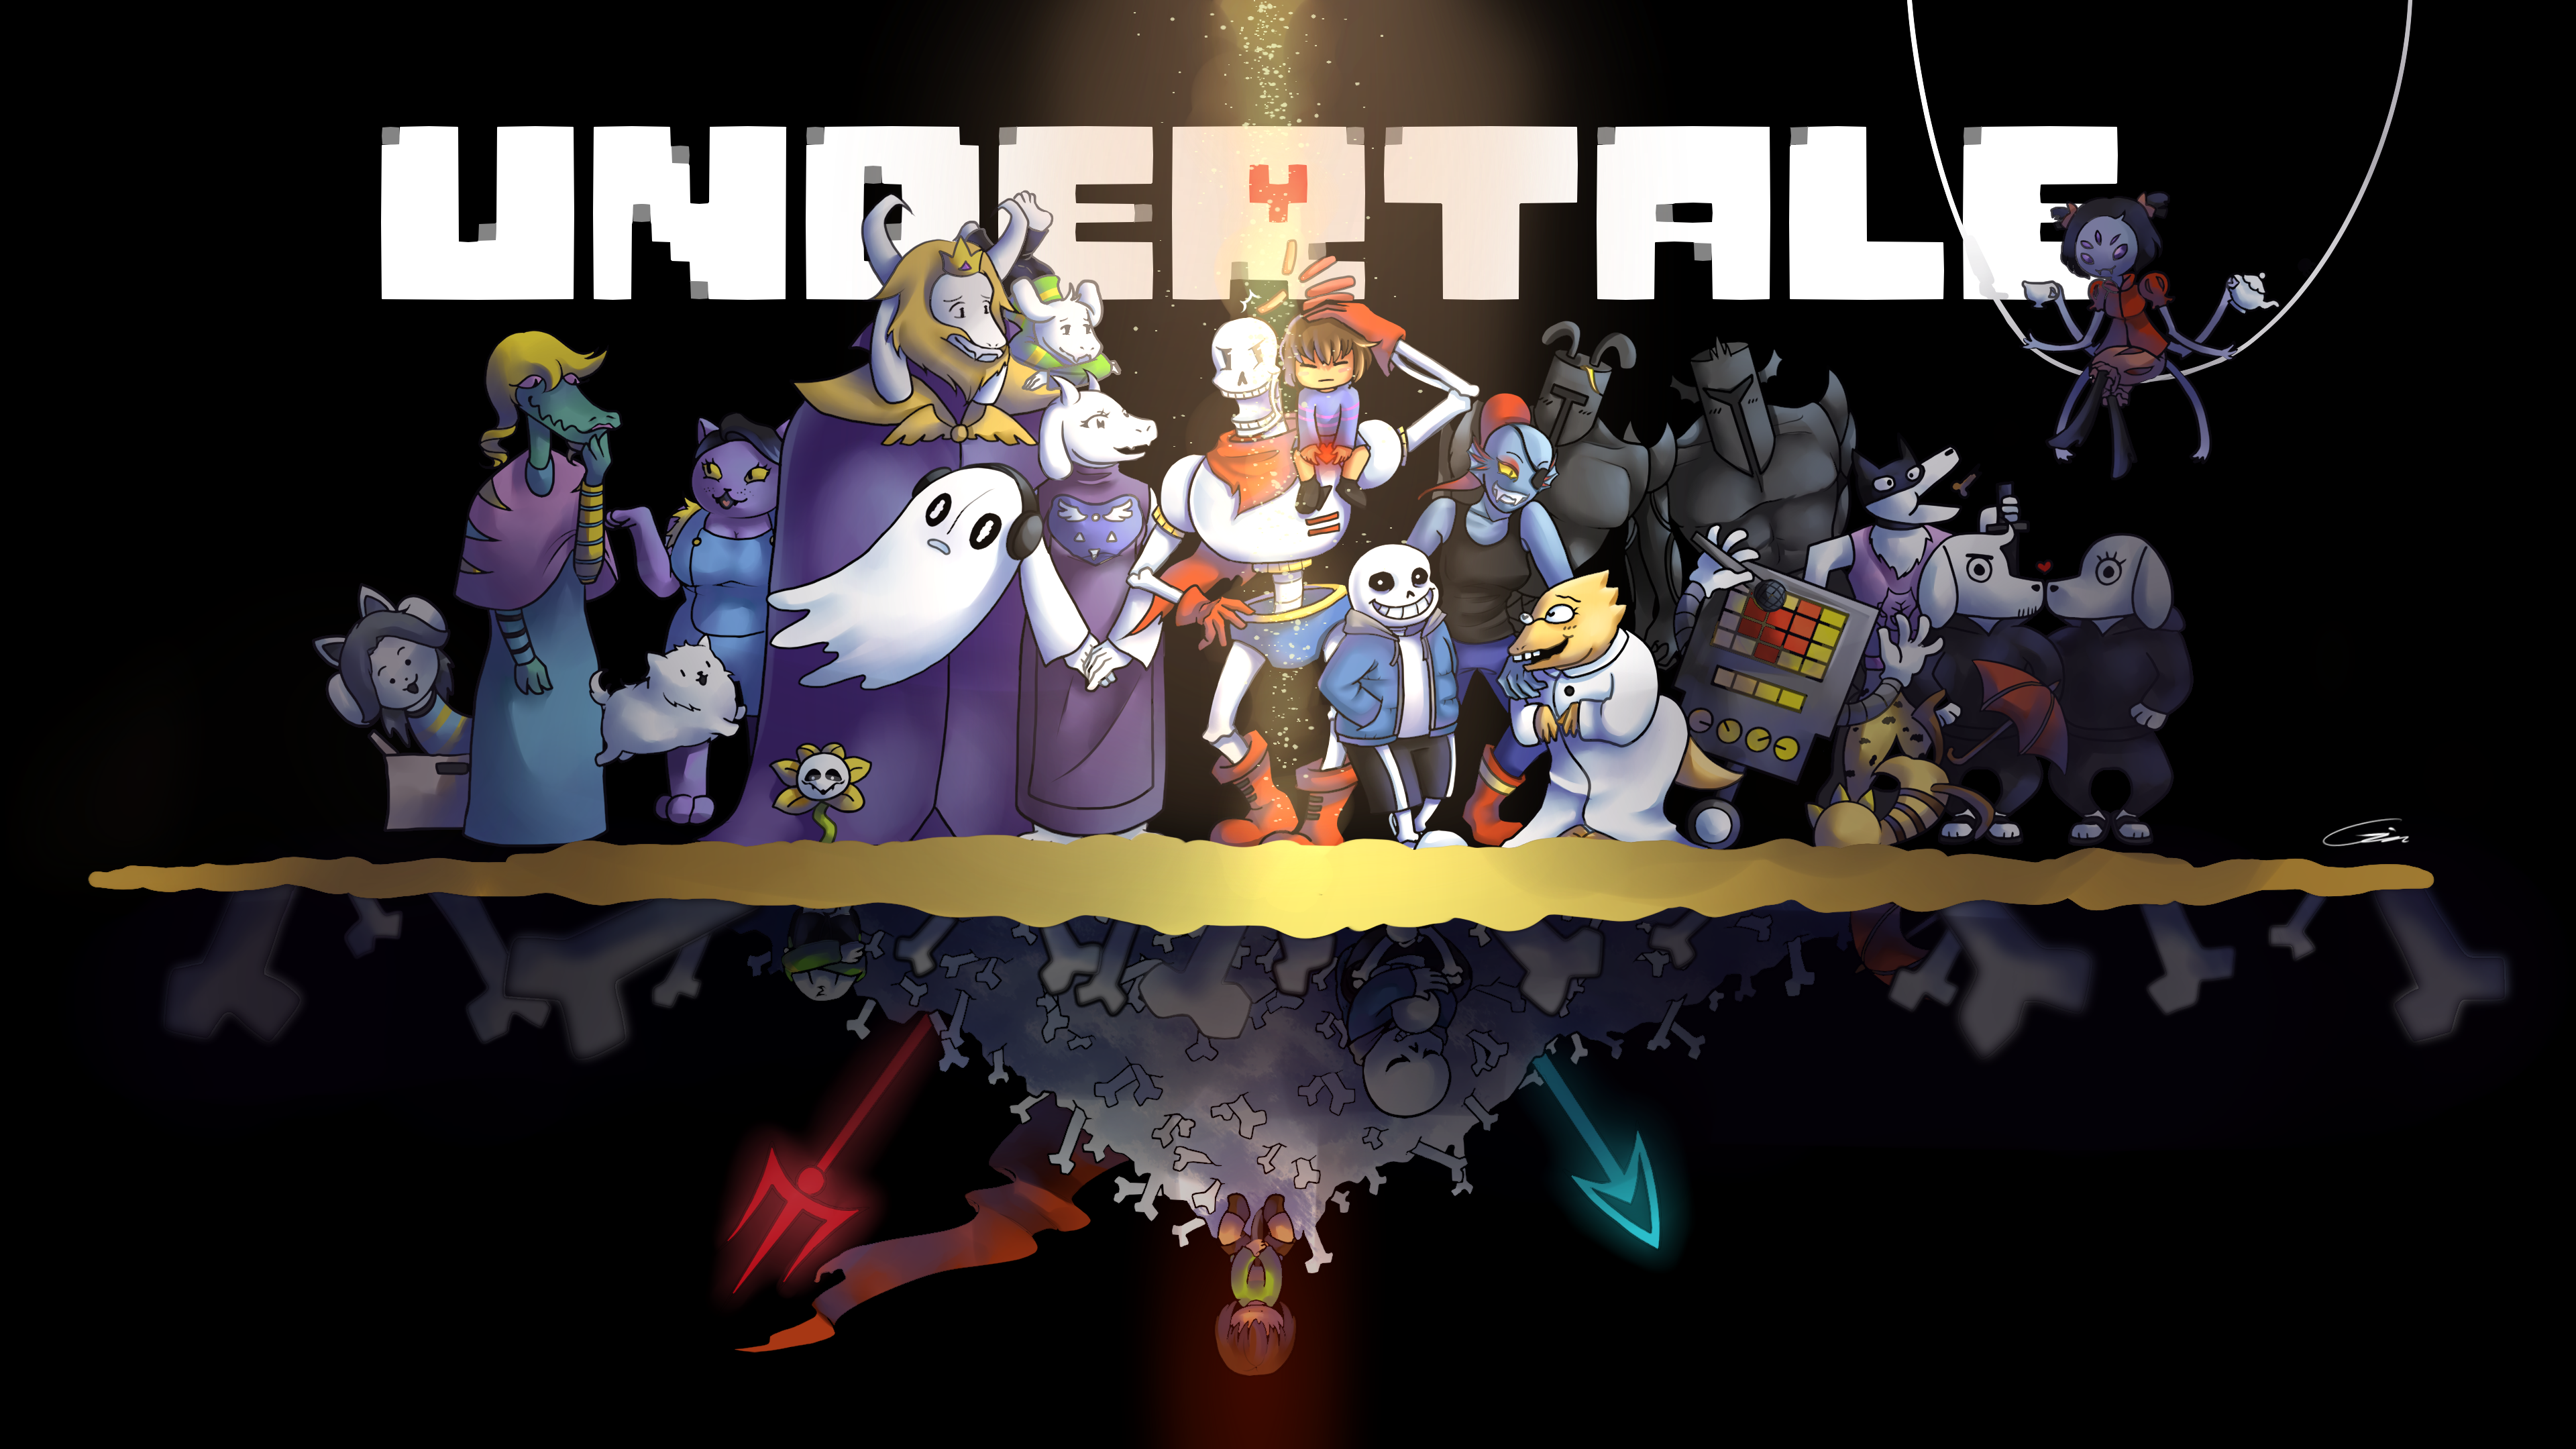 ll give Undertale that it has a cute balanced and memorable cast